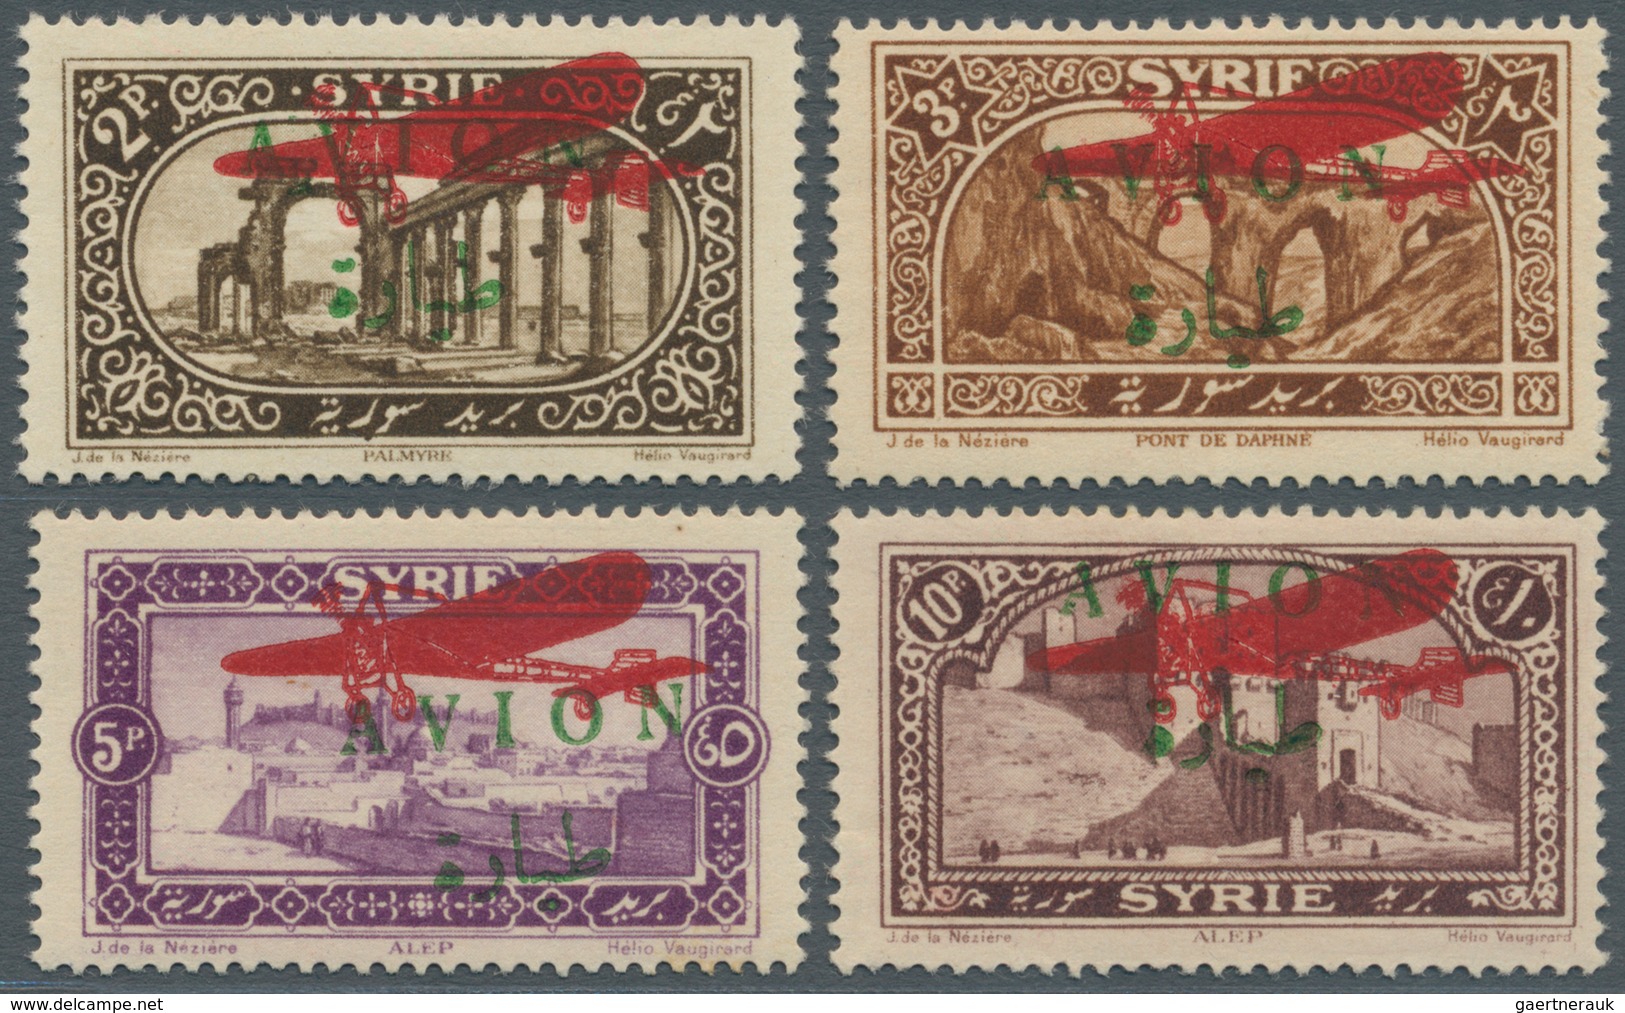 Syrien: 1925, Airmails, Red "Plane" Surcharge On Green "AVION" Oveprints, Not Issued, Complete Set O - Syrien